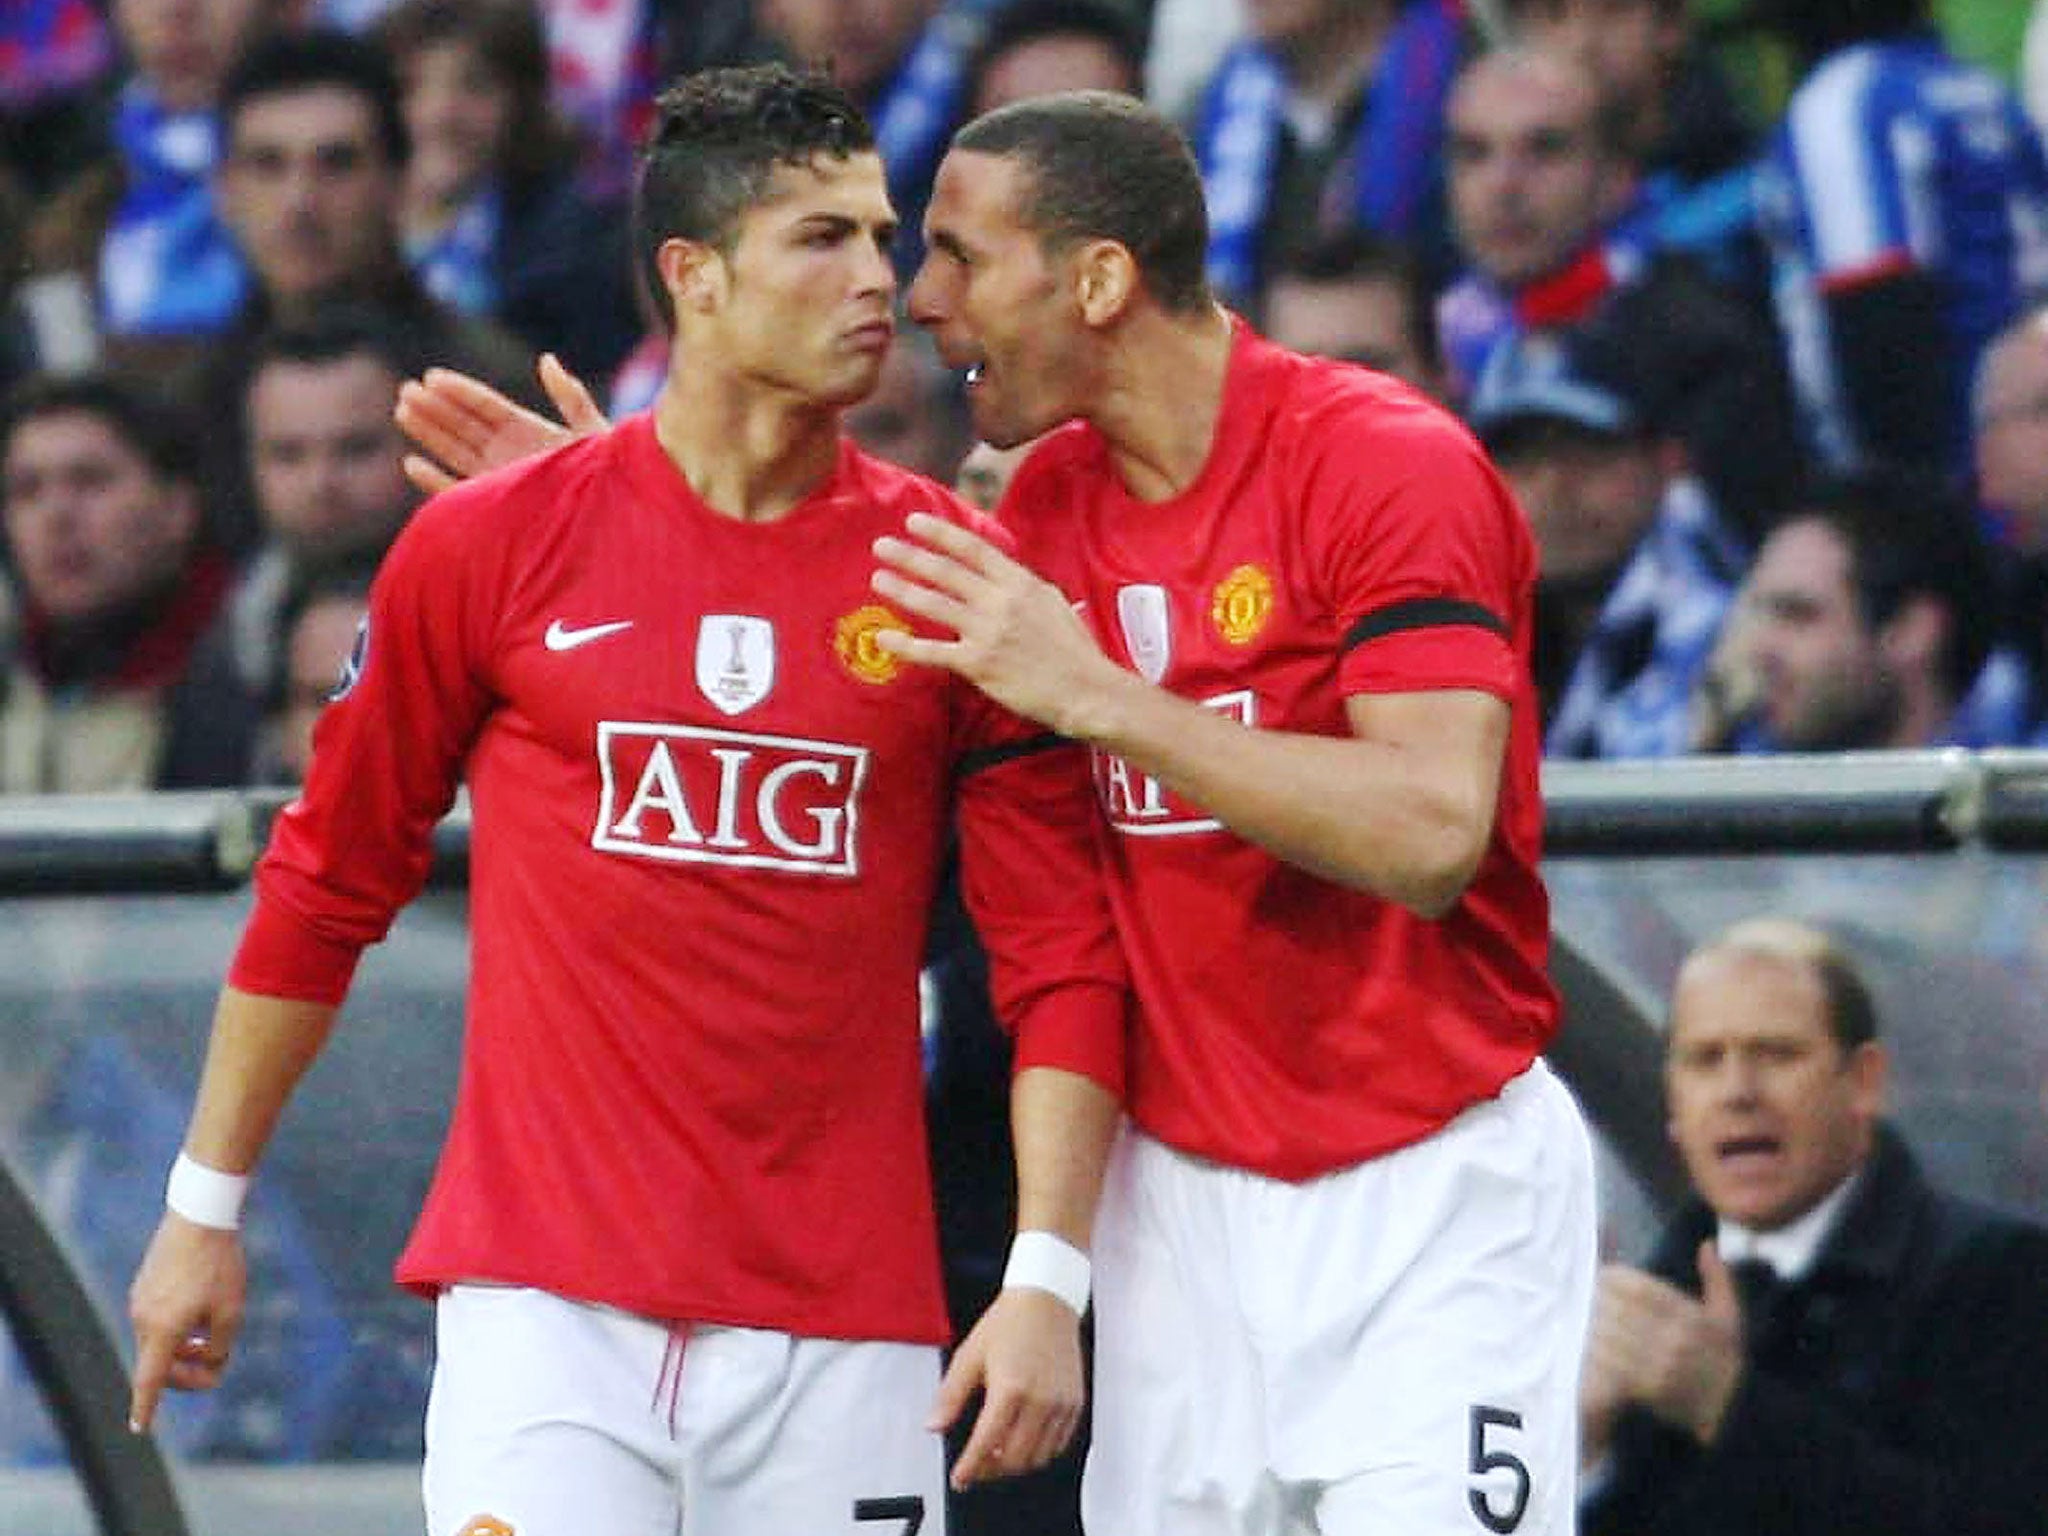 Rio Ferdinand says Cristiano Ronaldo received abuse for his tight jeans at Manchester United